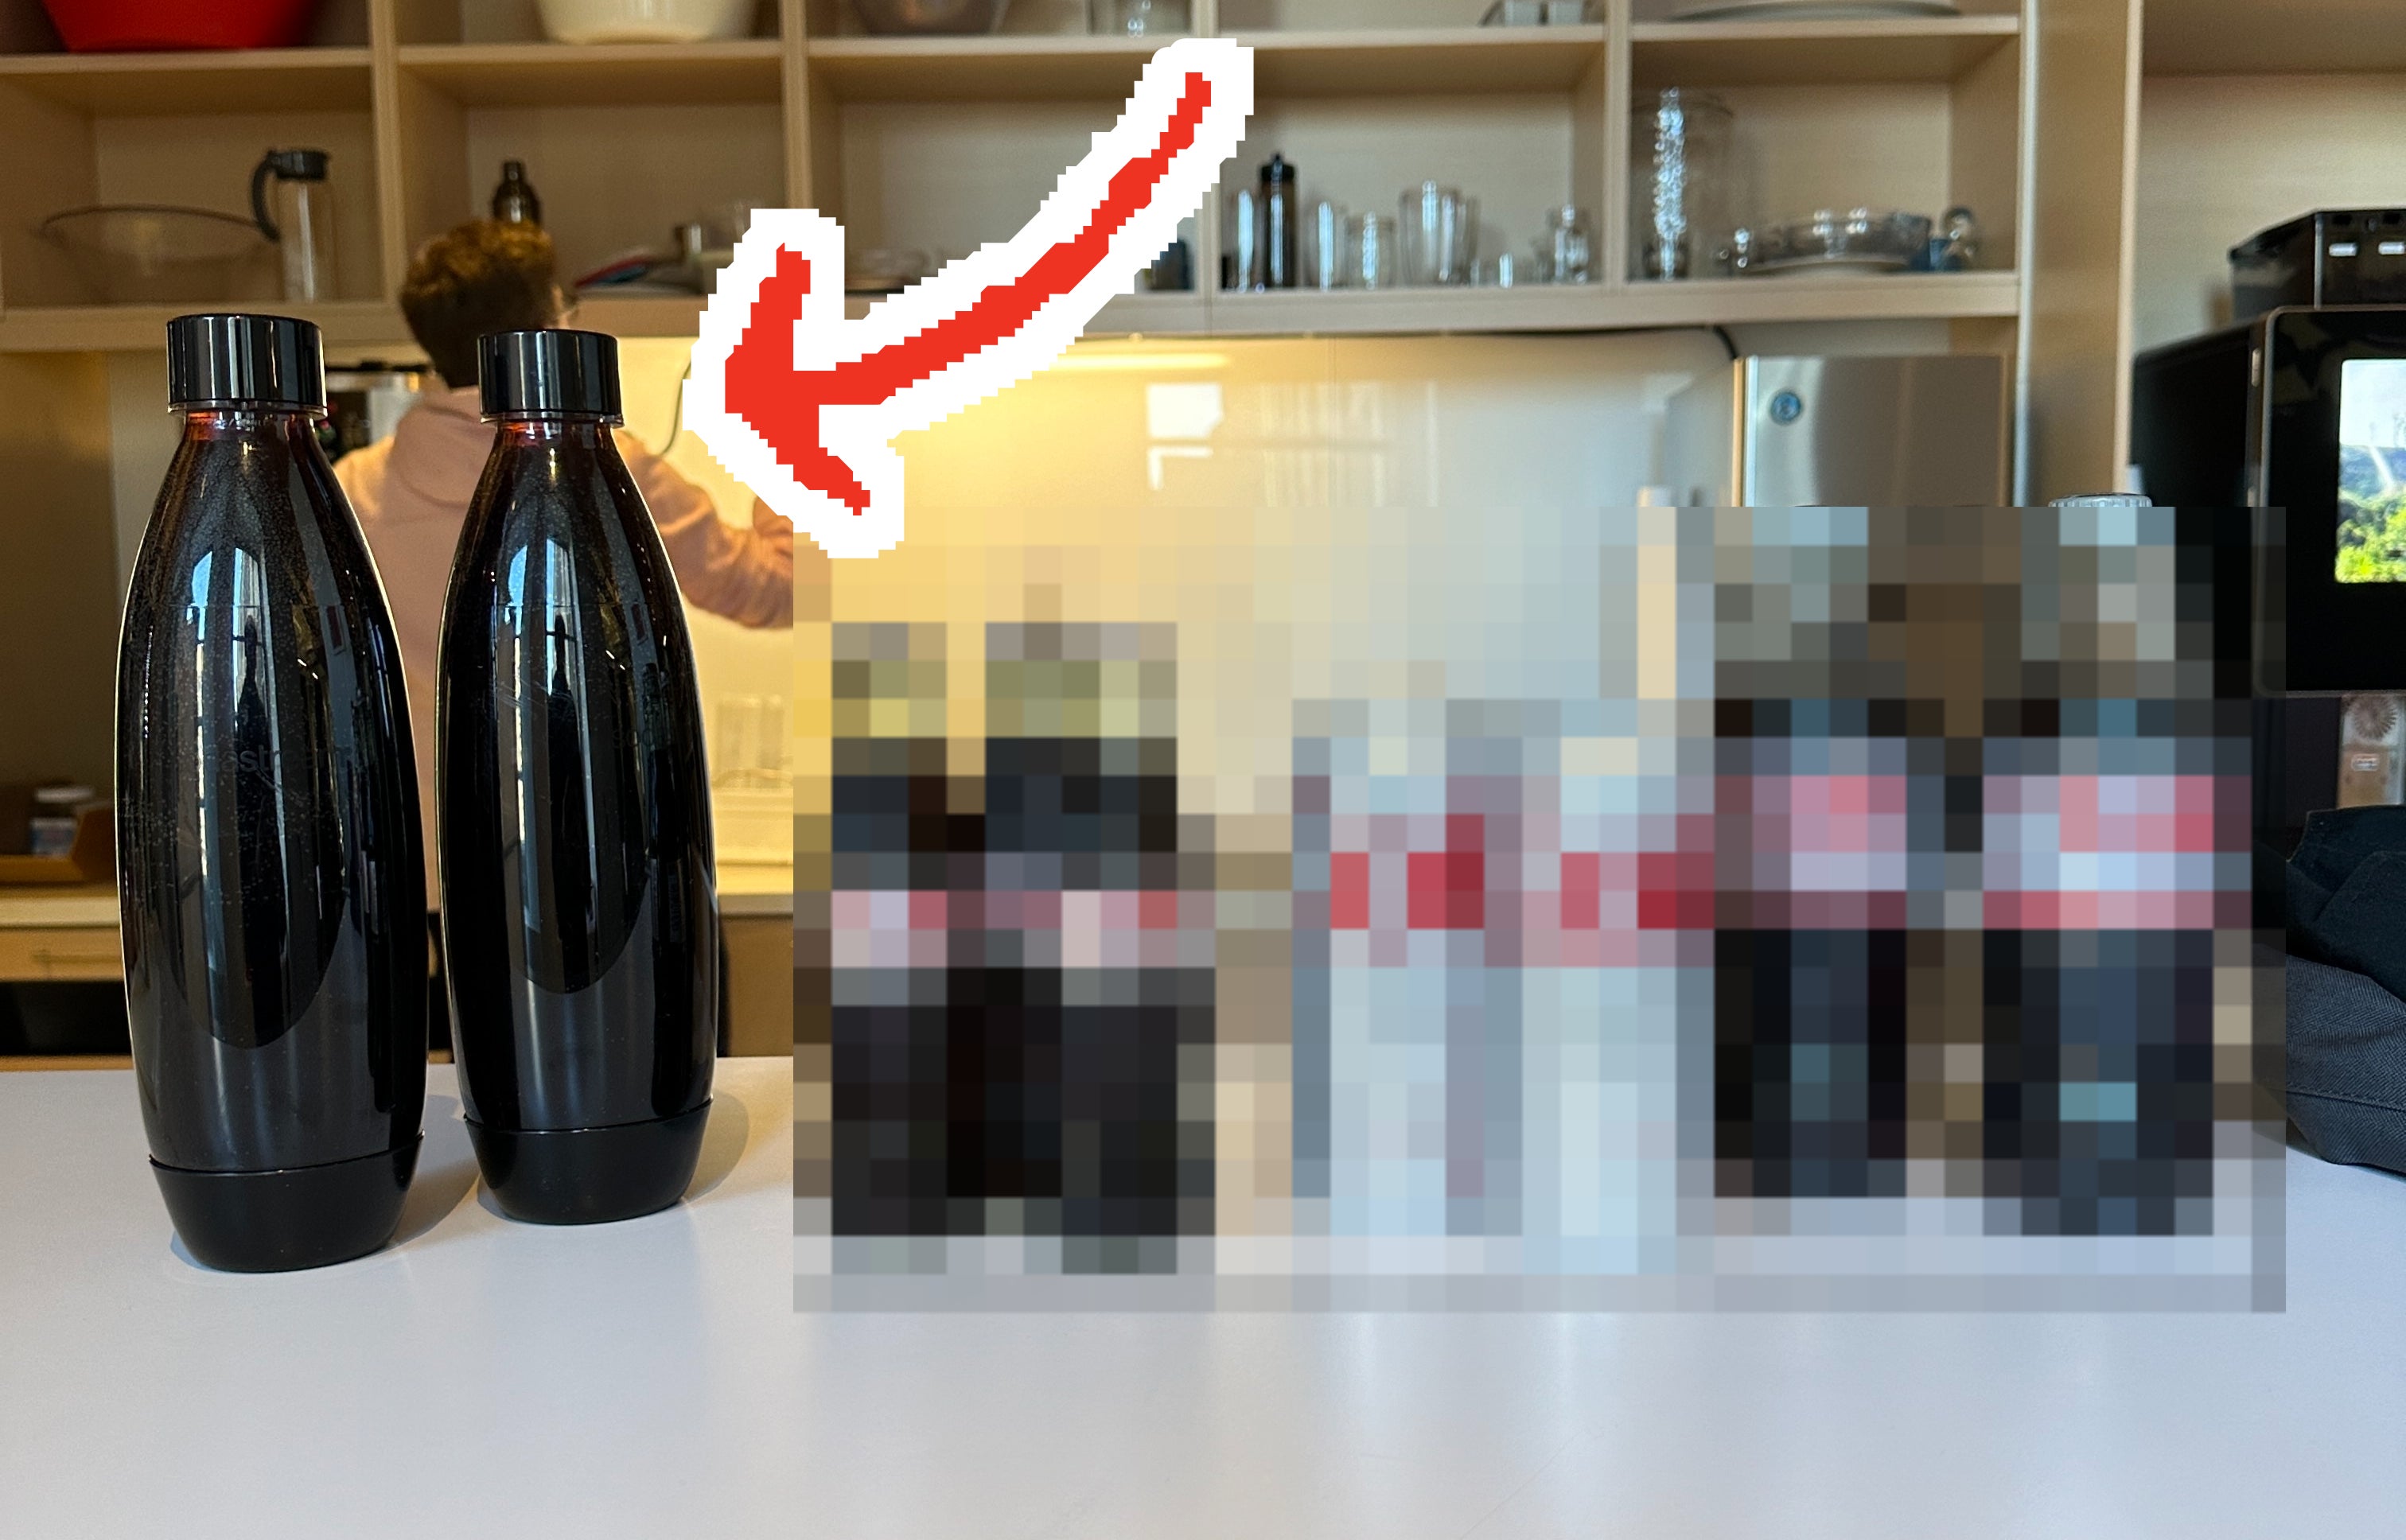 The four different types of Diet Coke lined up on a table, with an arrow pointing to the SodaStream bottles